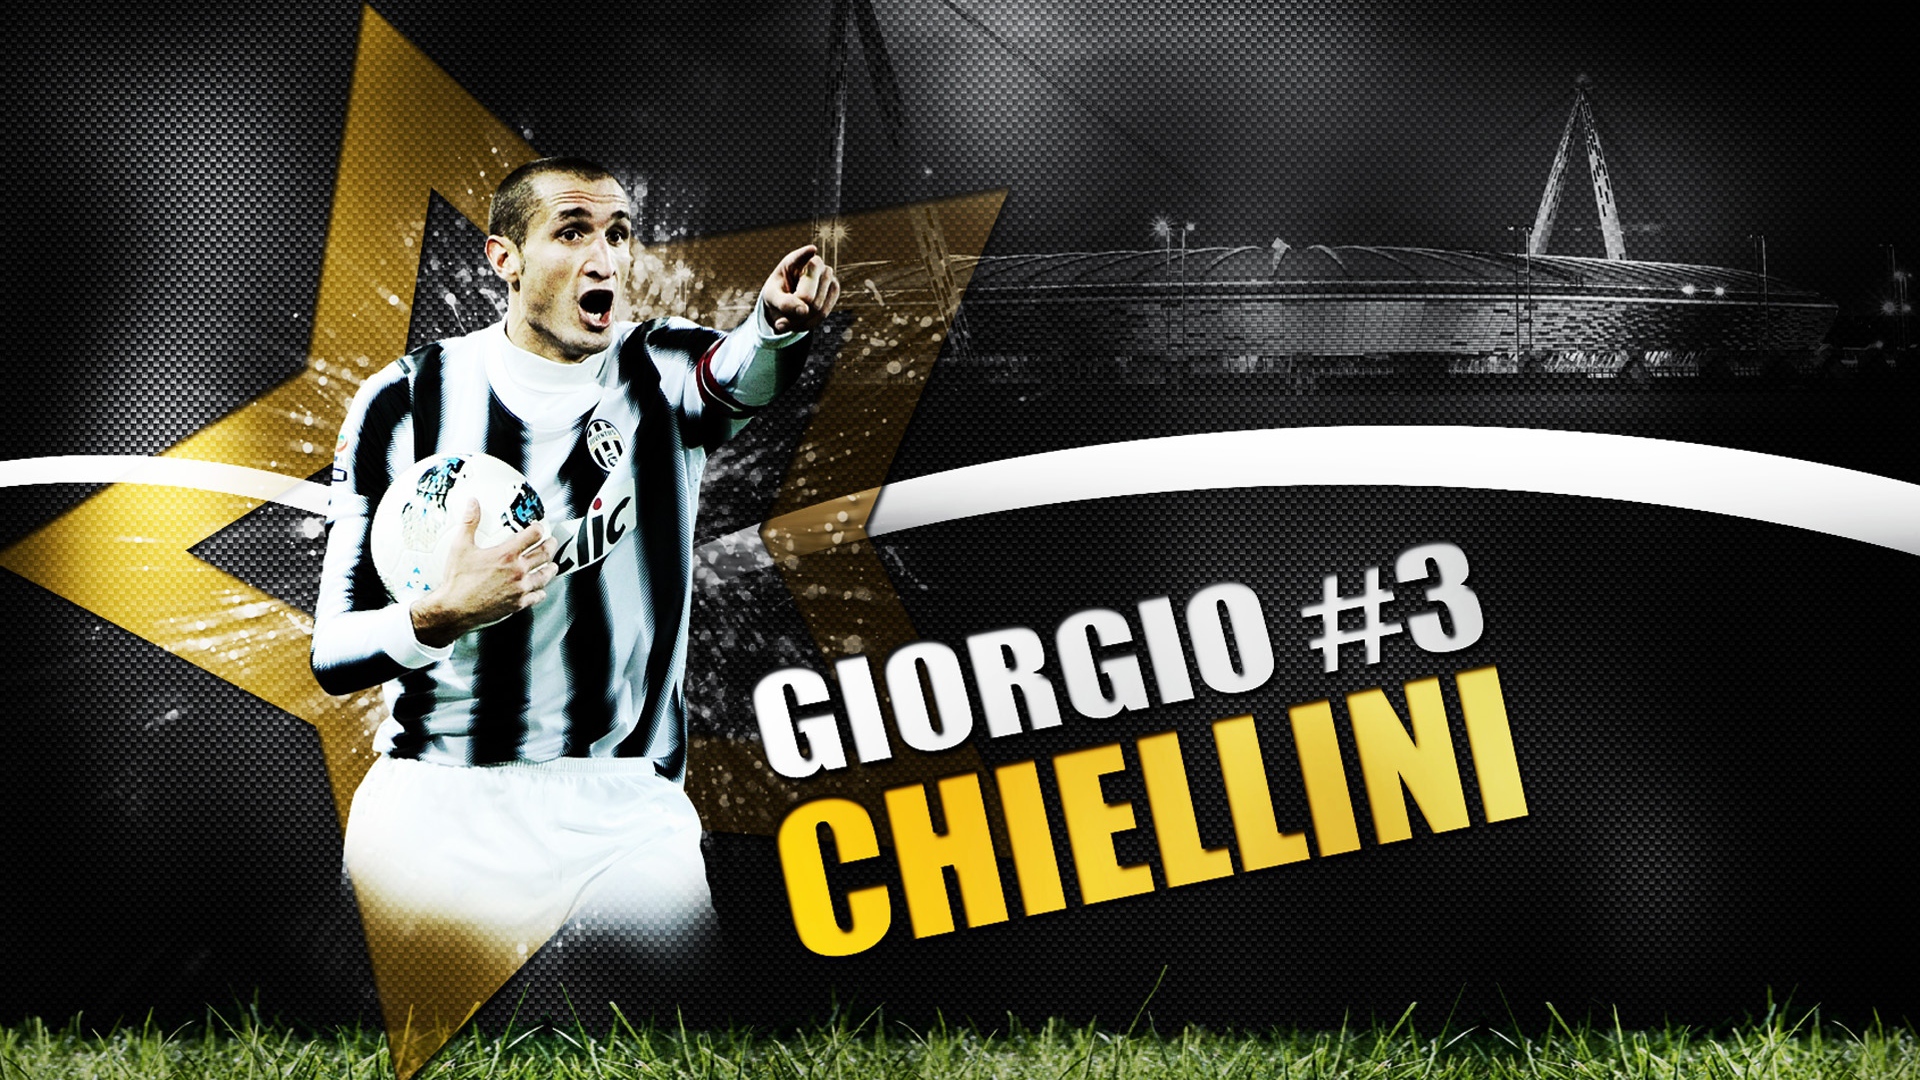 The football player of Juventus Giorgio Chiellini with a ball